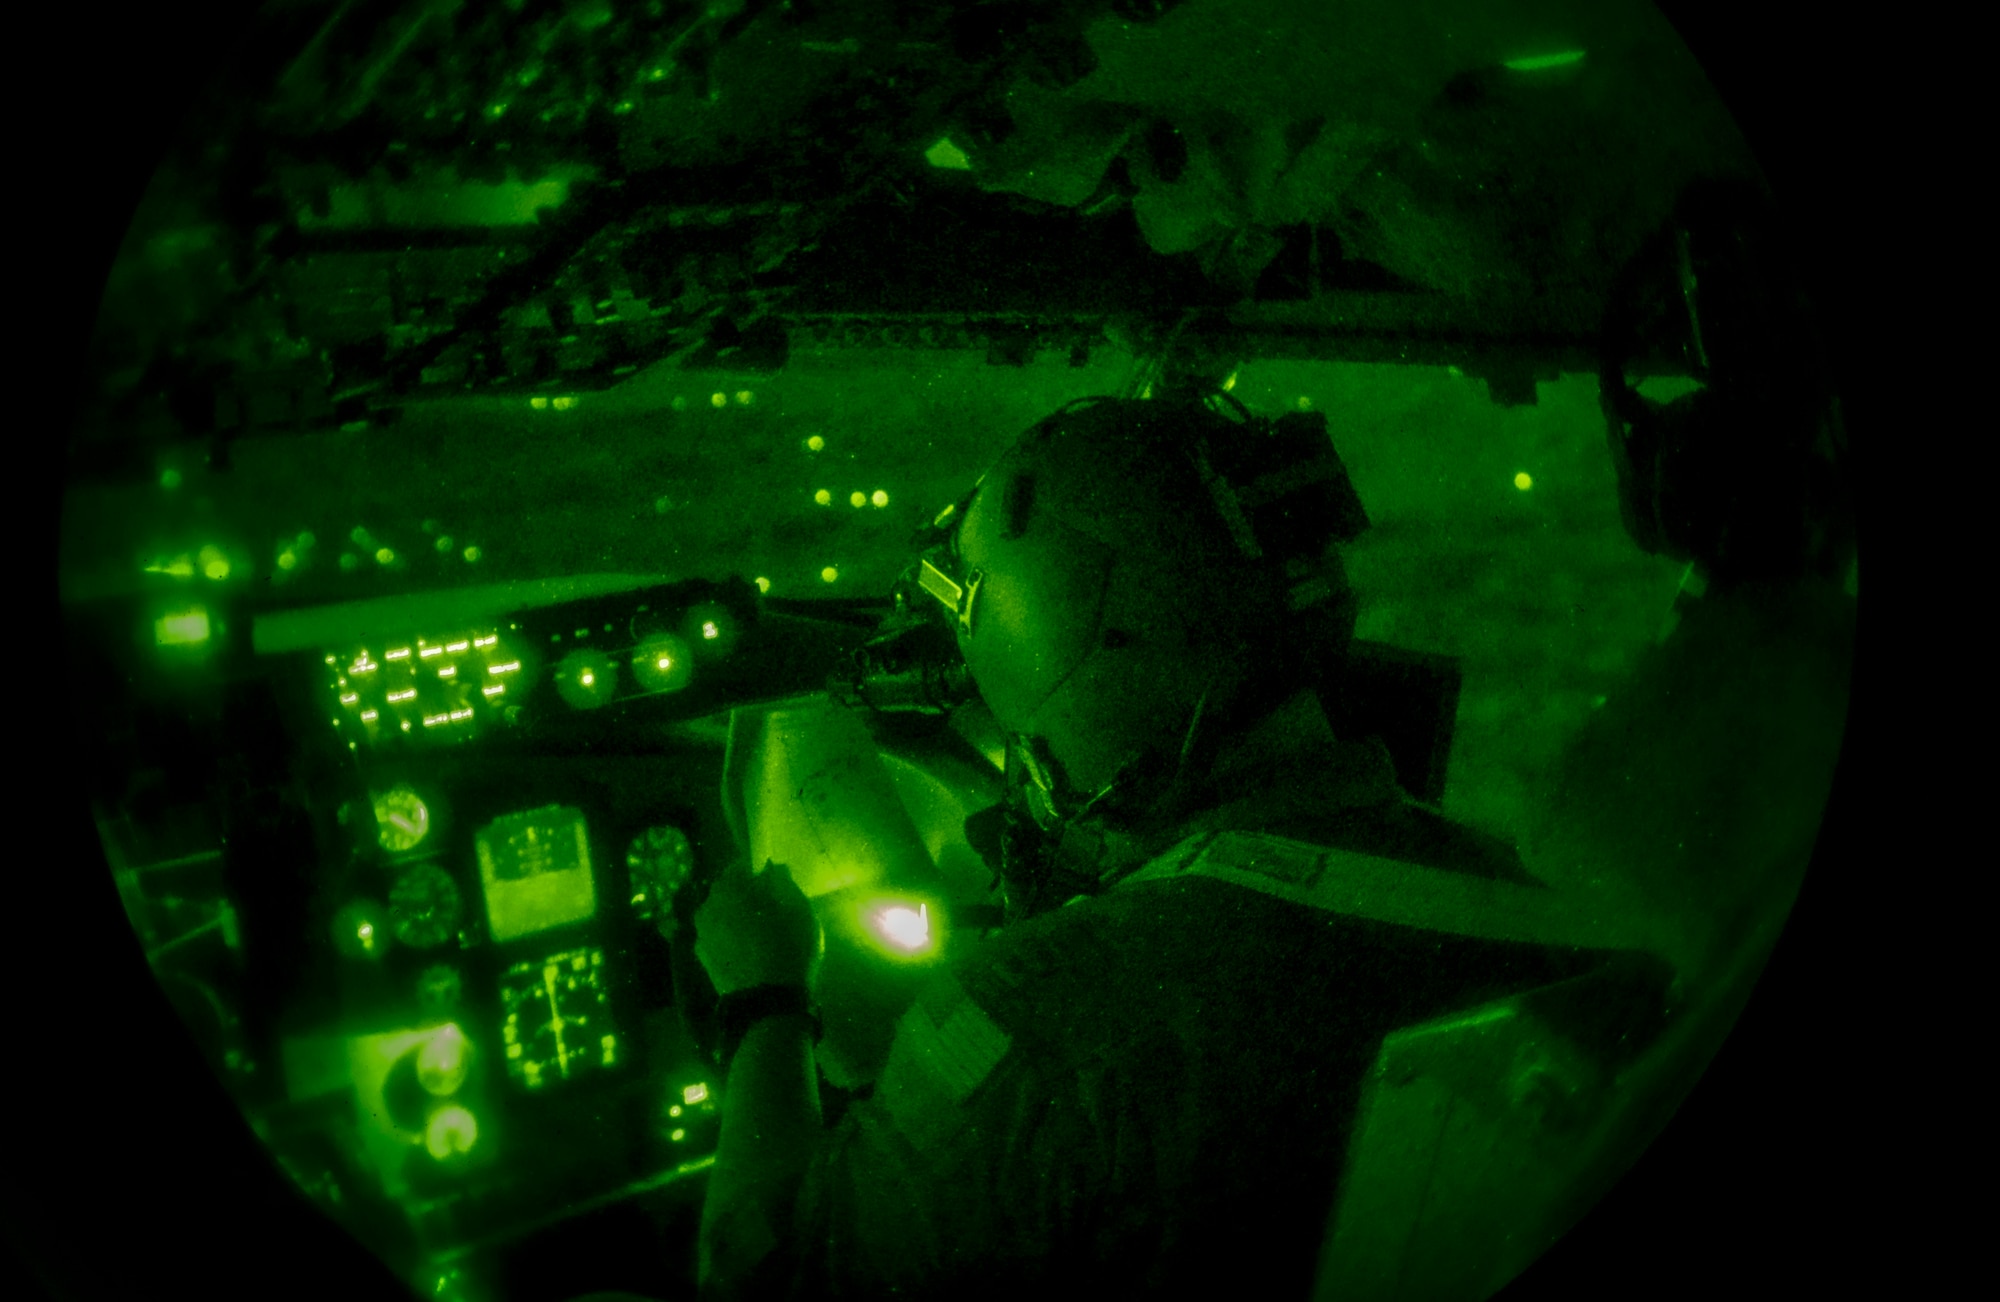 U.S. Air Force Capt Christopher Perkins, pilot assigned to 92nd Air Refueling Squadron, reviews the flight route while performing nighttime tactical approaches and departures (TADS) during the threats and tactics phase of the 509th Weapons School (WPS) course, March 17, 2023. During this training phase the 509th WPS students are evaluated on their ability to fly their TADs, take sufficient notes to effectively reconstruct the sortie, analyze the mission objectives, debrief the mission, and produce instructional fixes for areas that did not meet mission objectives. (U.S. Air Force photo by 2nd Lt. Ariana Wilkinson)